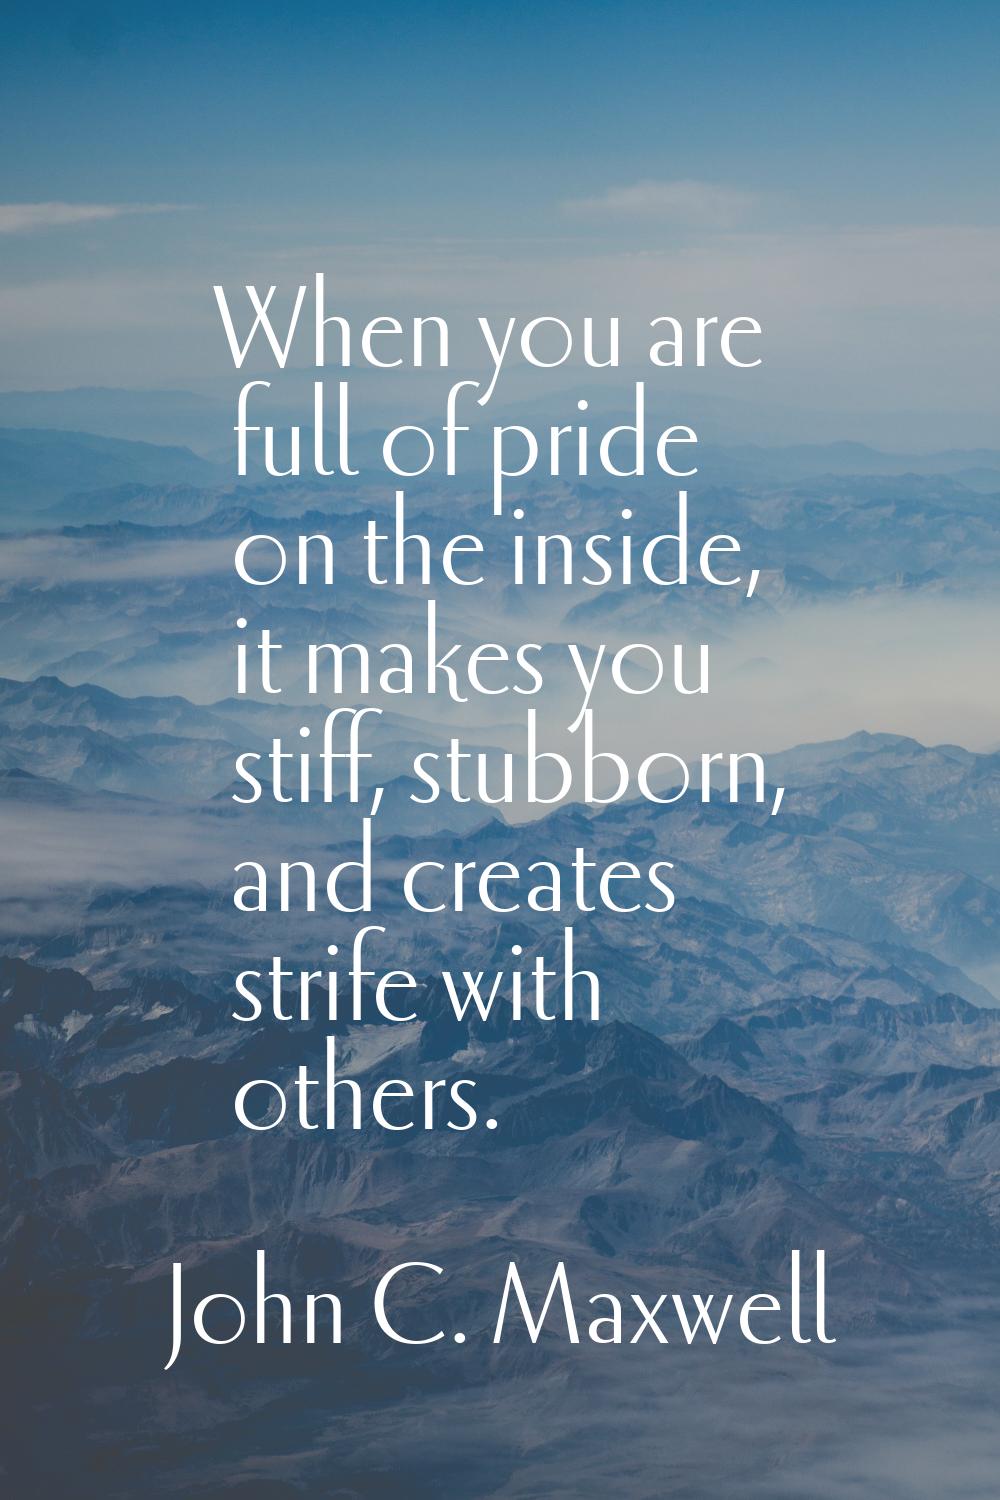 When you are full of pride on the inside, it makes you stiff, stubborn, and creates strife with oth